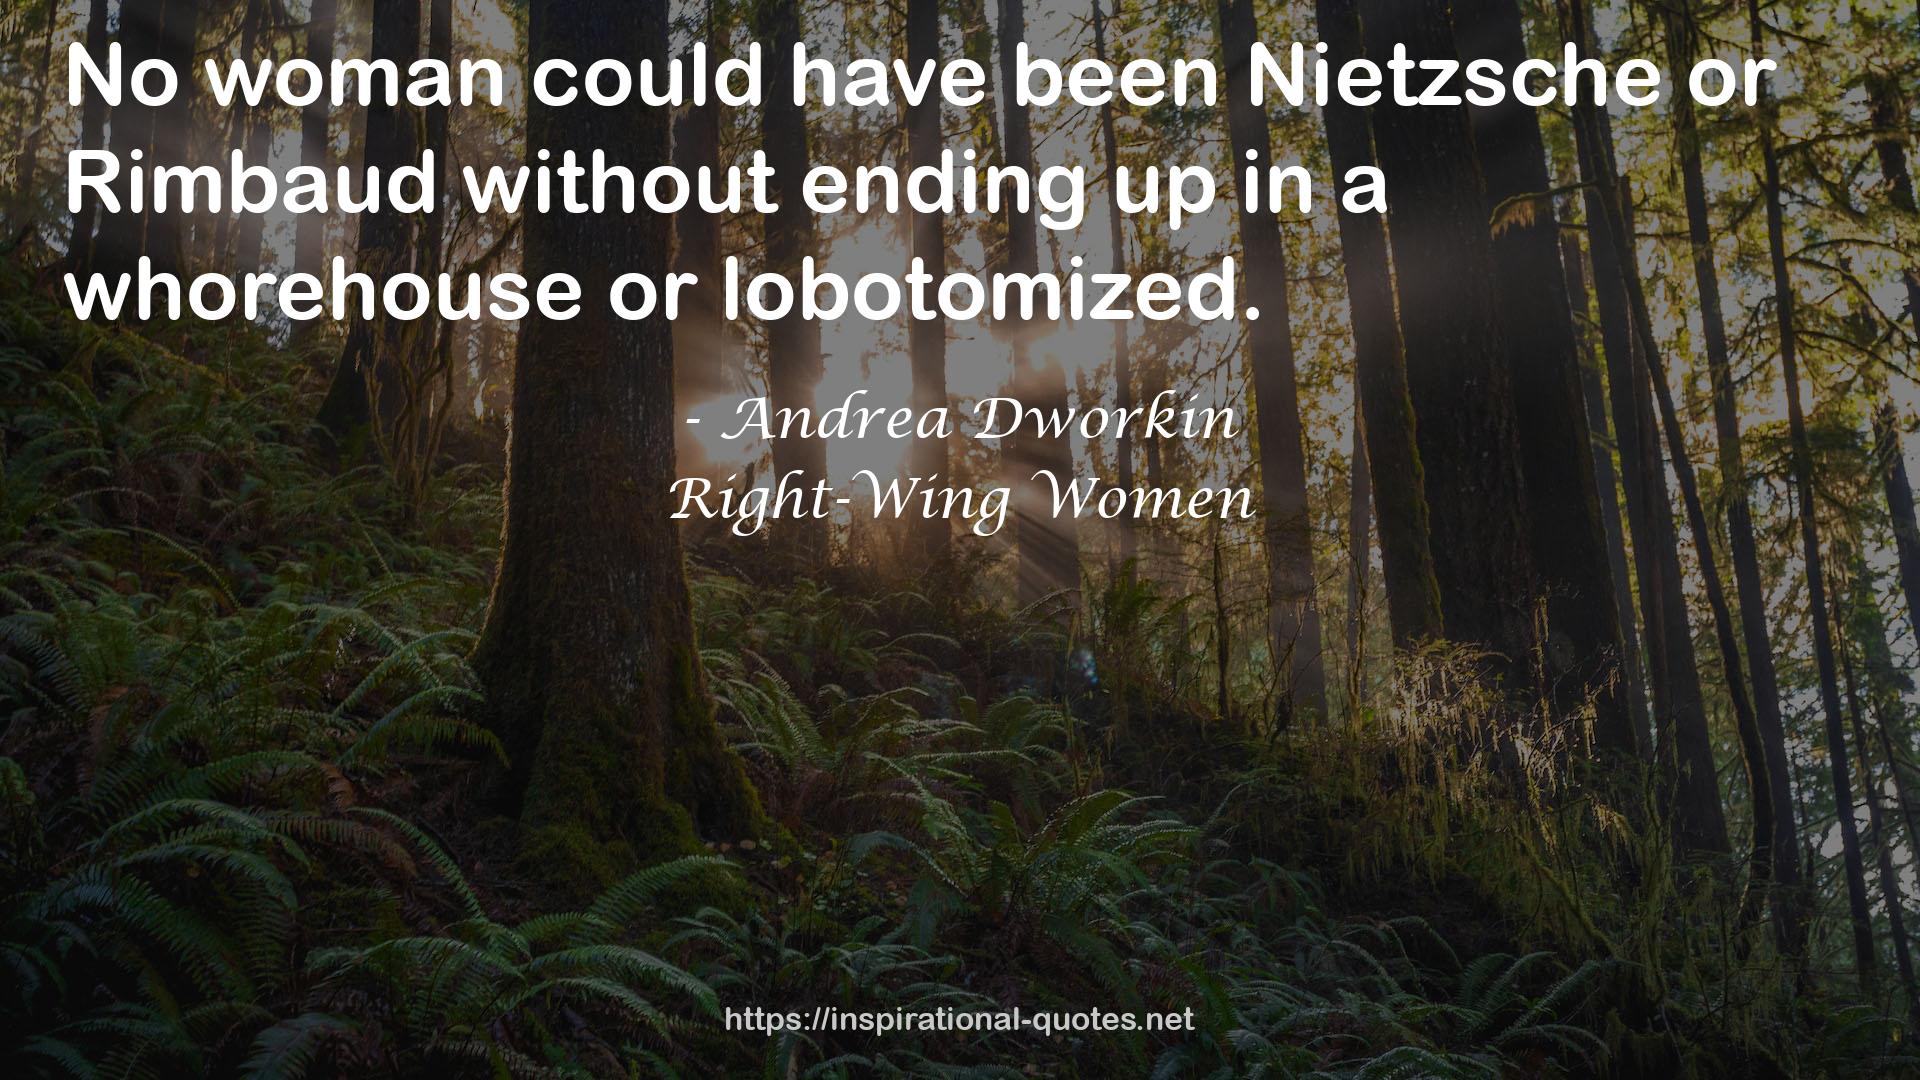 Right-Wing Women QUOTES